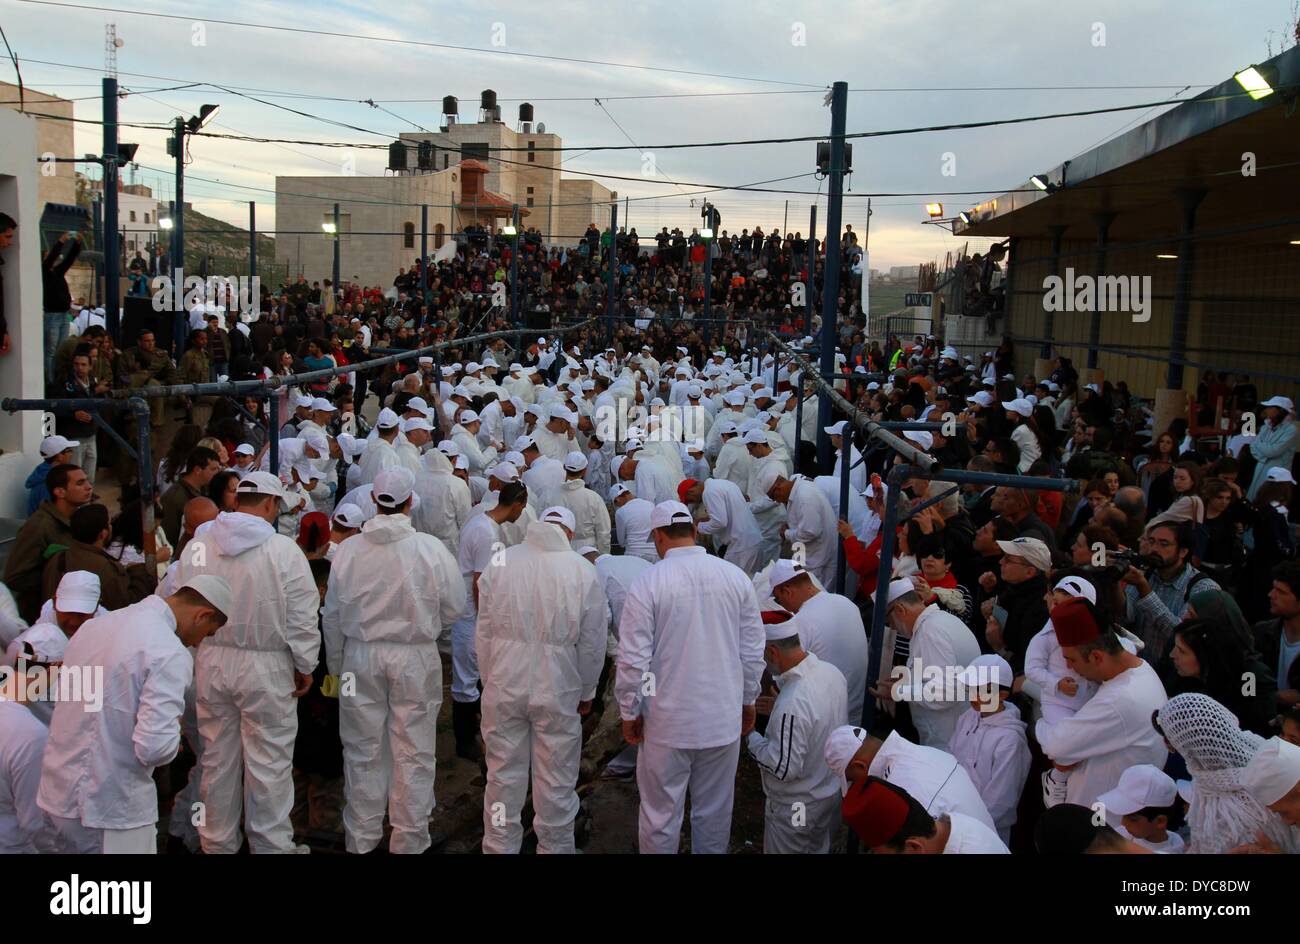 (140414)-- NABLUS, April 14, 2014 (Xinhua) -- Members of the Samaritan sect participate in the traditional Passover sacrifice on Mount Gerizim, near the West Bank city of Nablus, on April 13, 2014. Samaritans have been present on the Land of Israel for over 2,500 years. Their religion is considered Abrahamic, a very close relative of Judaism in ritual observance. (Xinhua/Ayman Nobani) Stock Photo